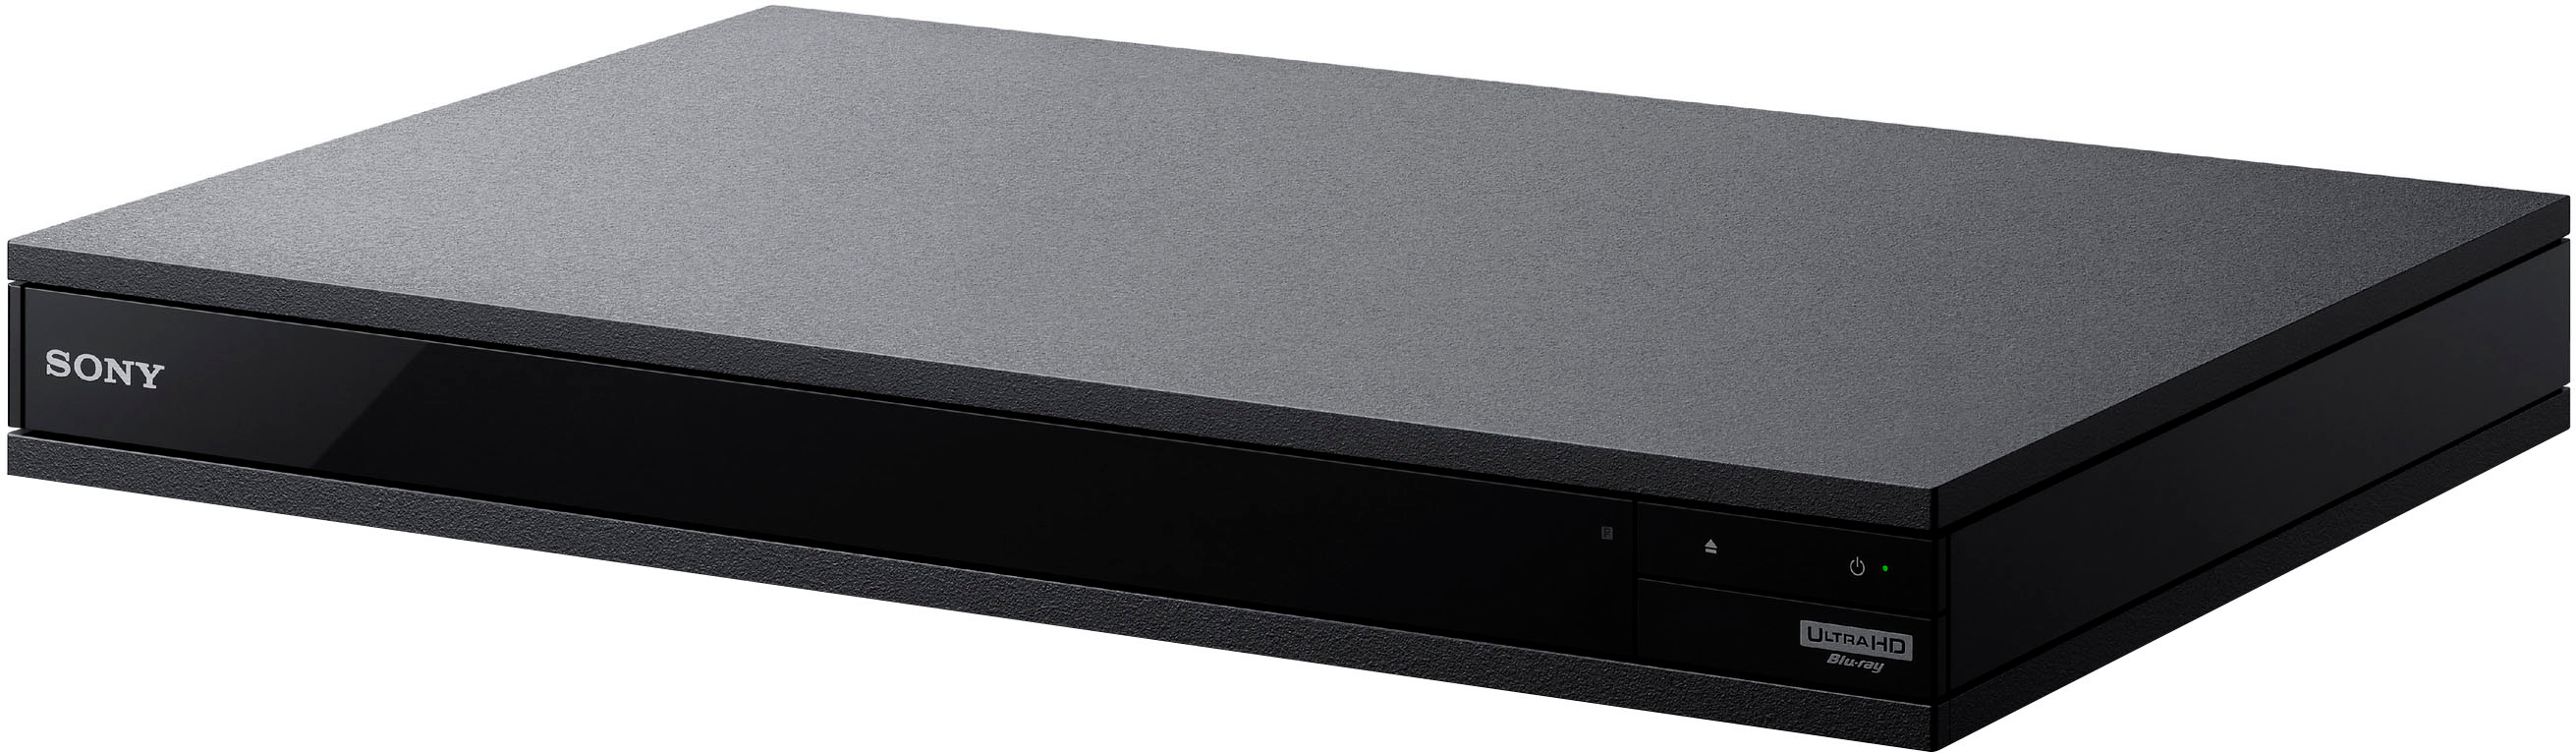 Sony UBP-X800 Streaming 4K Ultra HD 3D Hi-Res Audio Wi-Fi and Bluetooth Built-in Blu-ray Player with A 4K HDMI Cable and Remote Control Black 